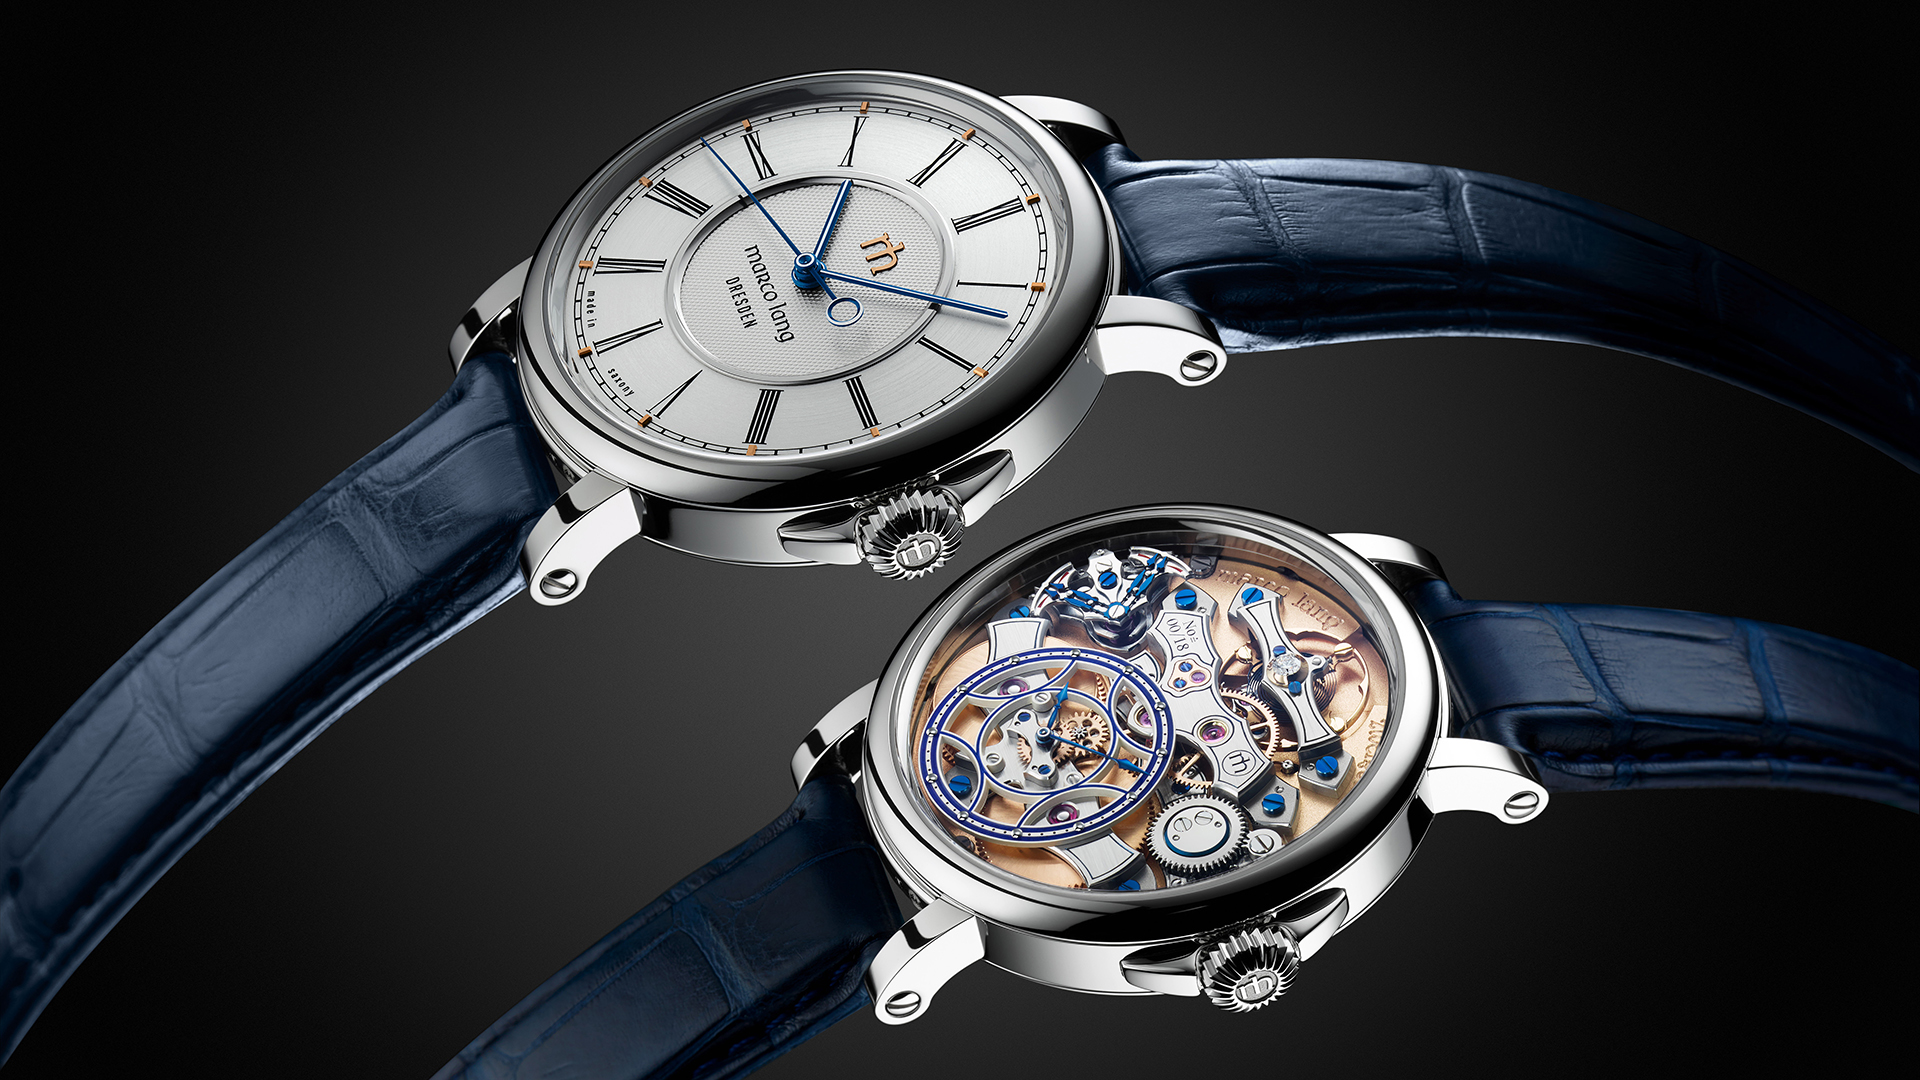 Marco Lang Launches With Limited Edition Zweigesicht-1 Watch